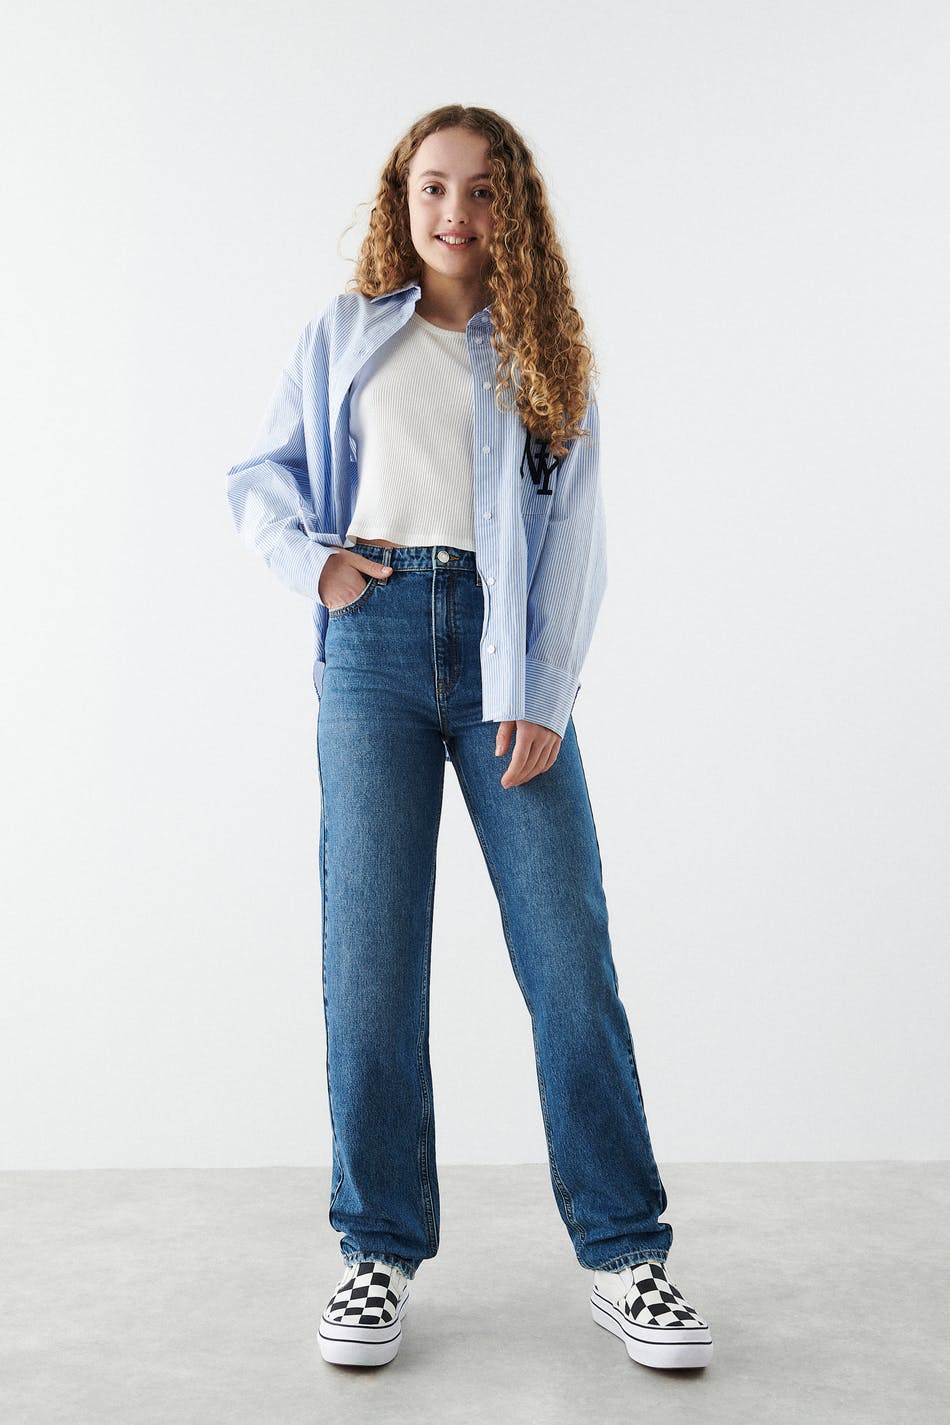 Straight 90s jeans, Gina Tricot